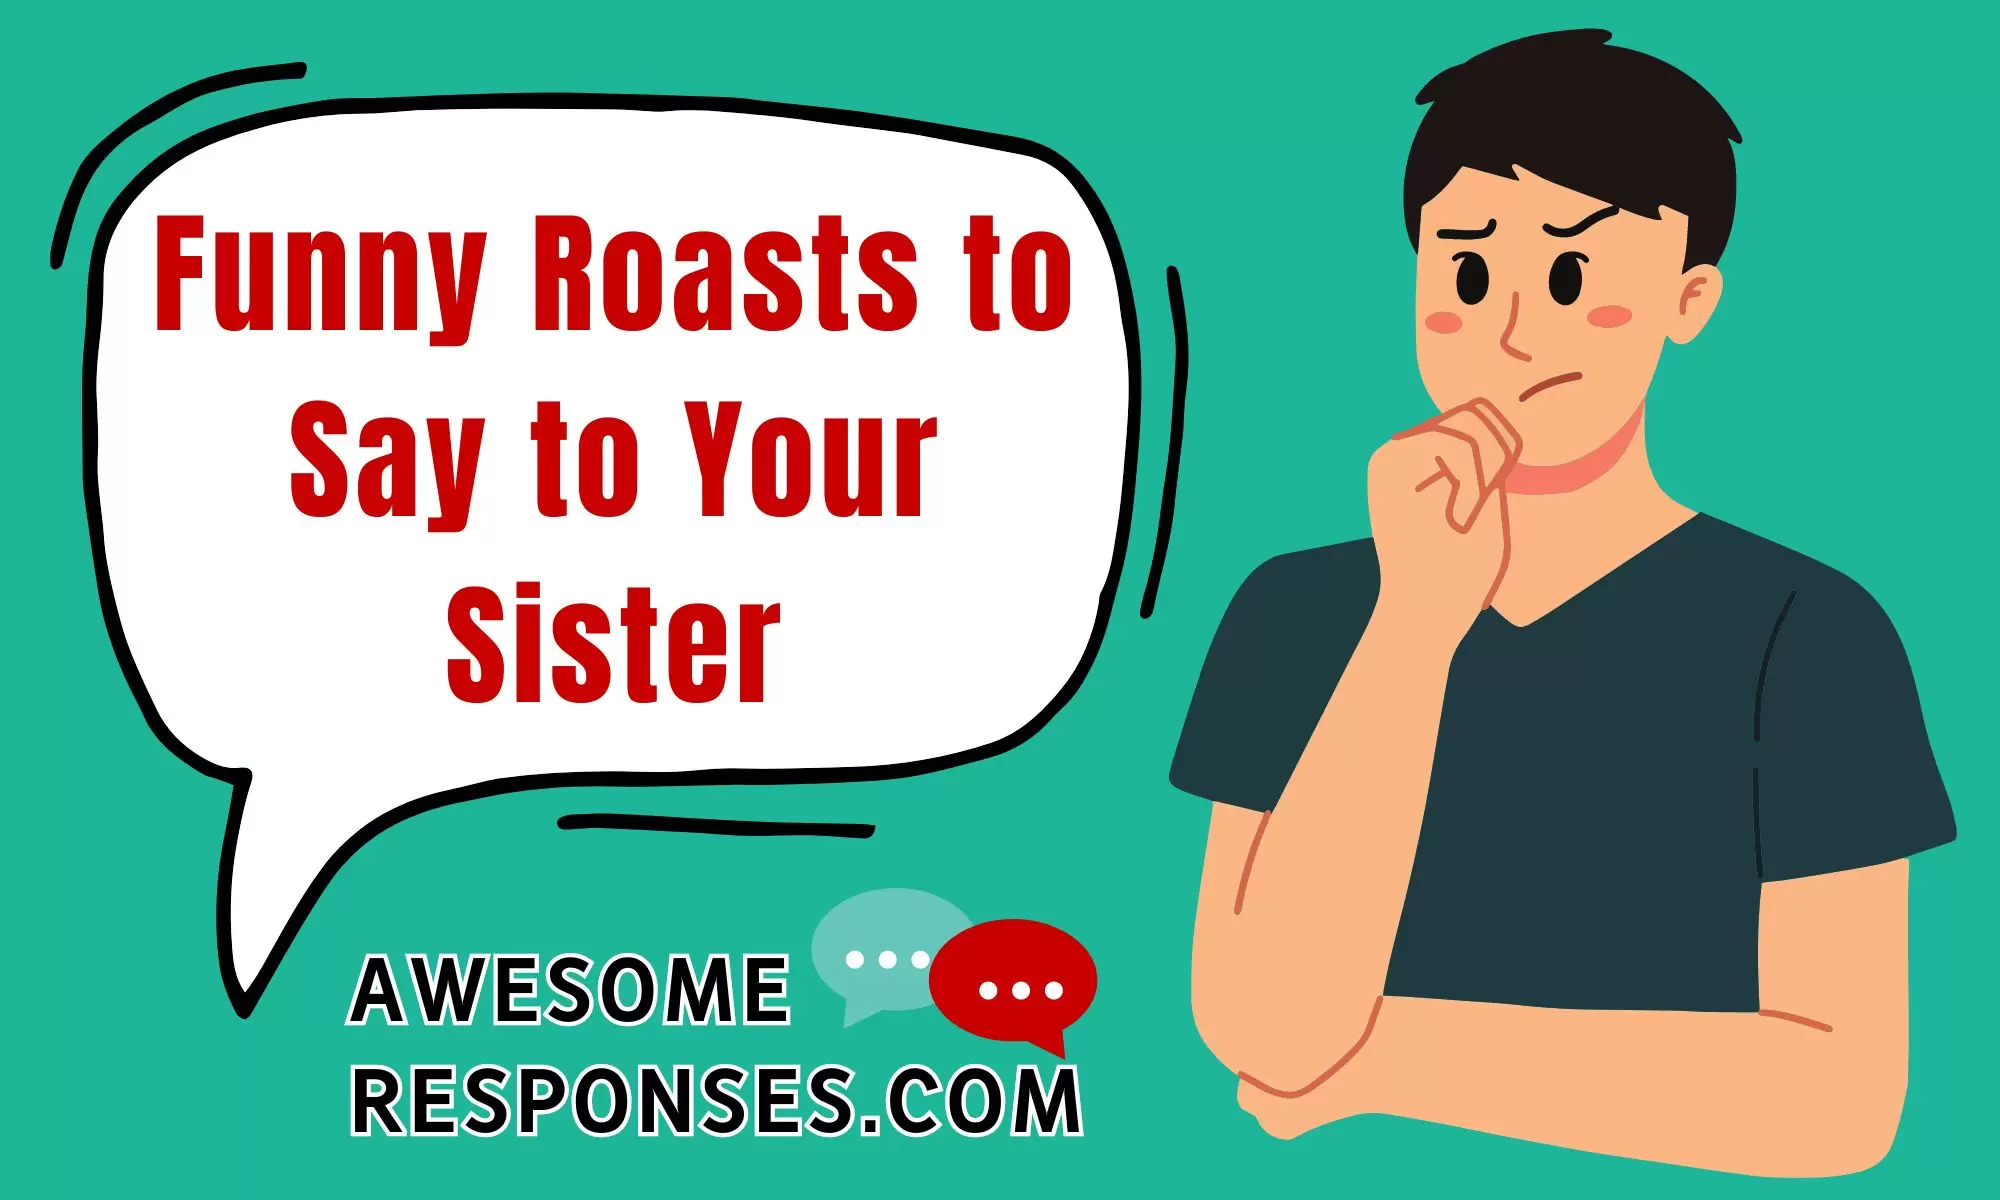 Funny Roasts to Say to Your Sister